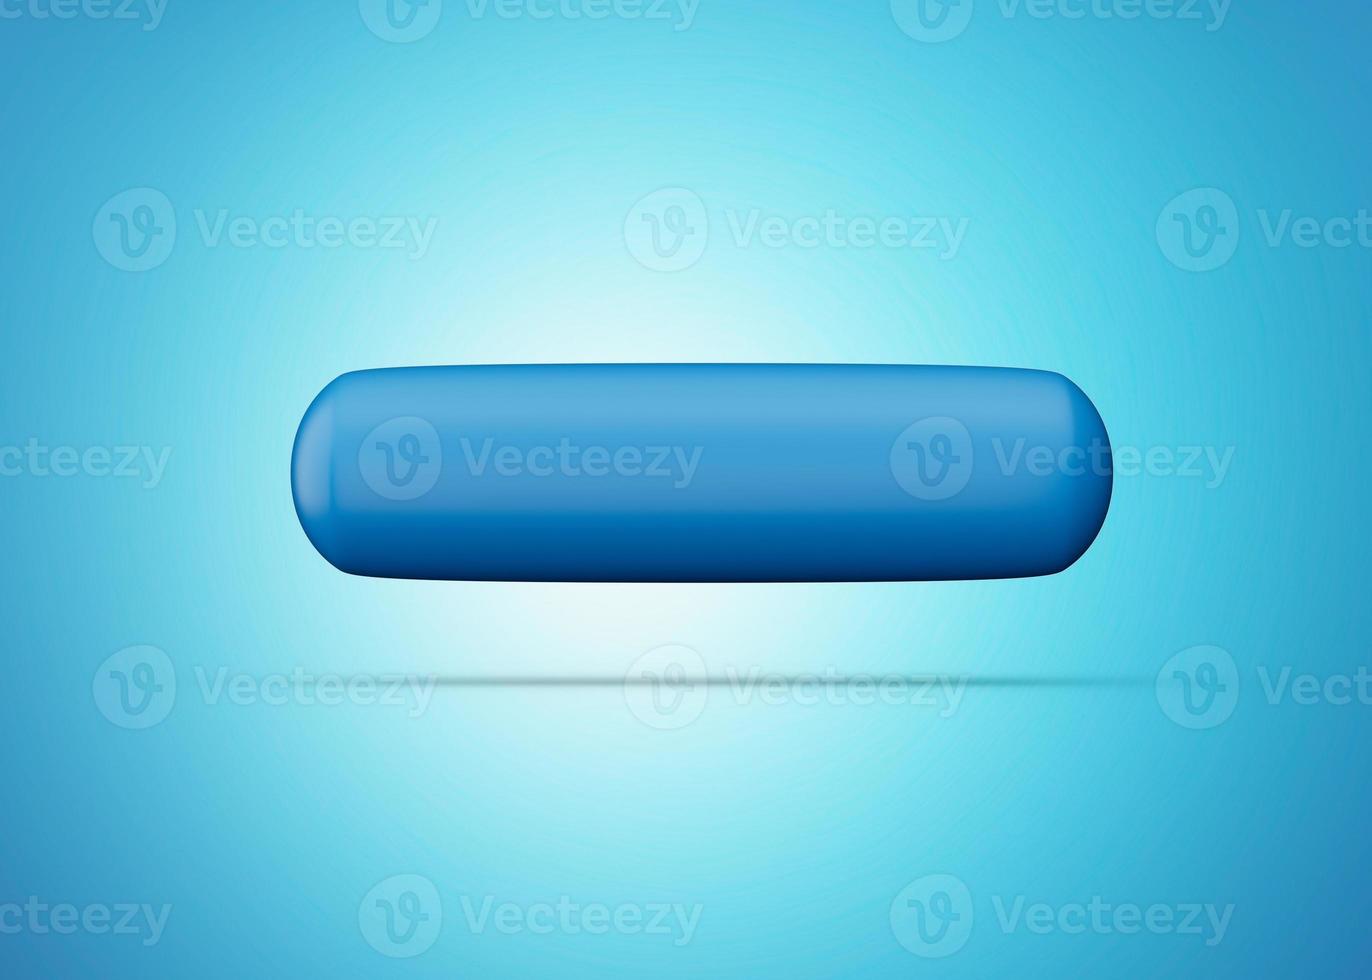 3d Minus icon isolated on blue background. Trendy and modern 3d style 3d illustration photo